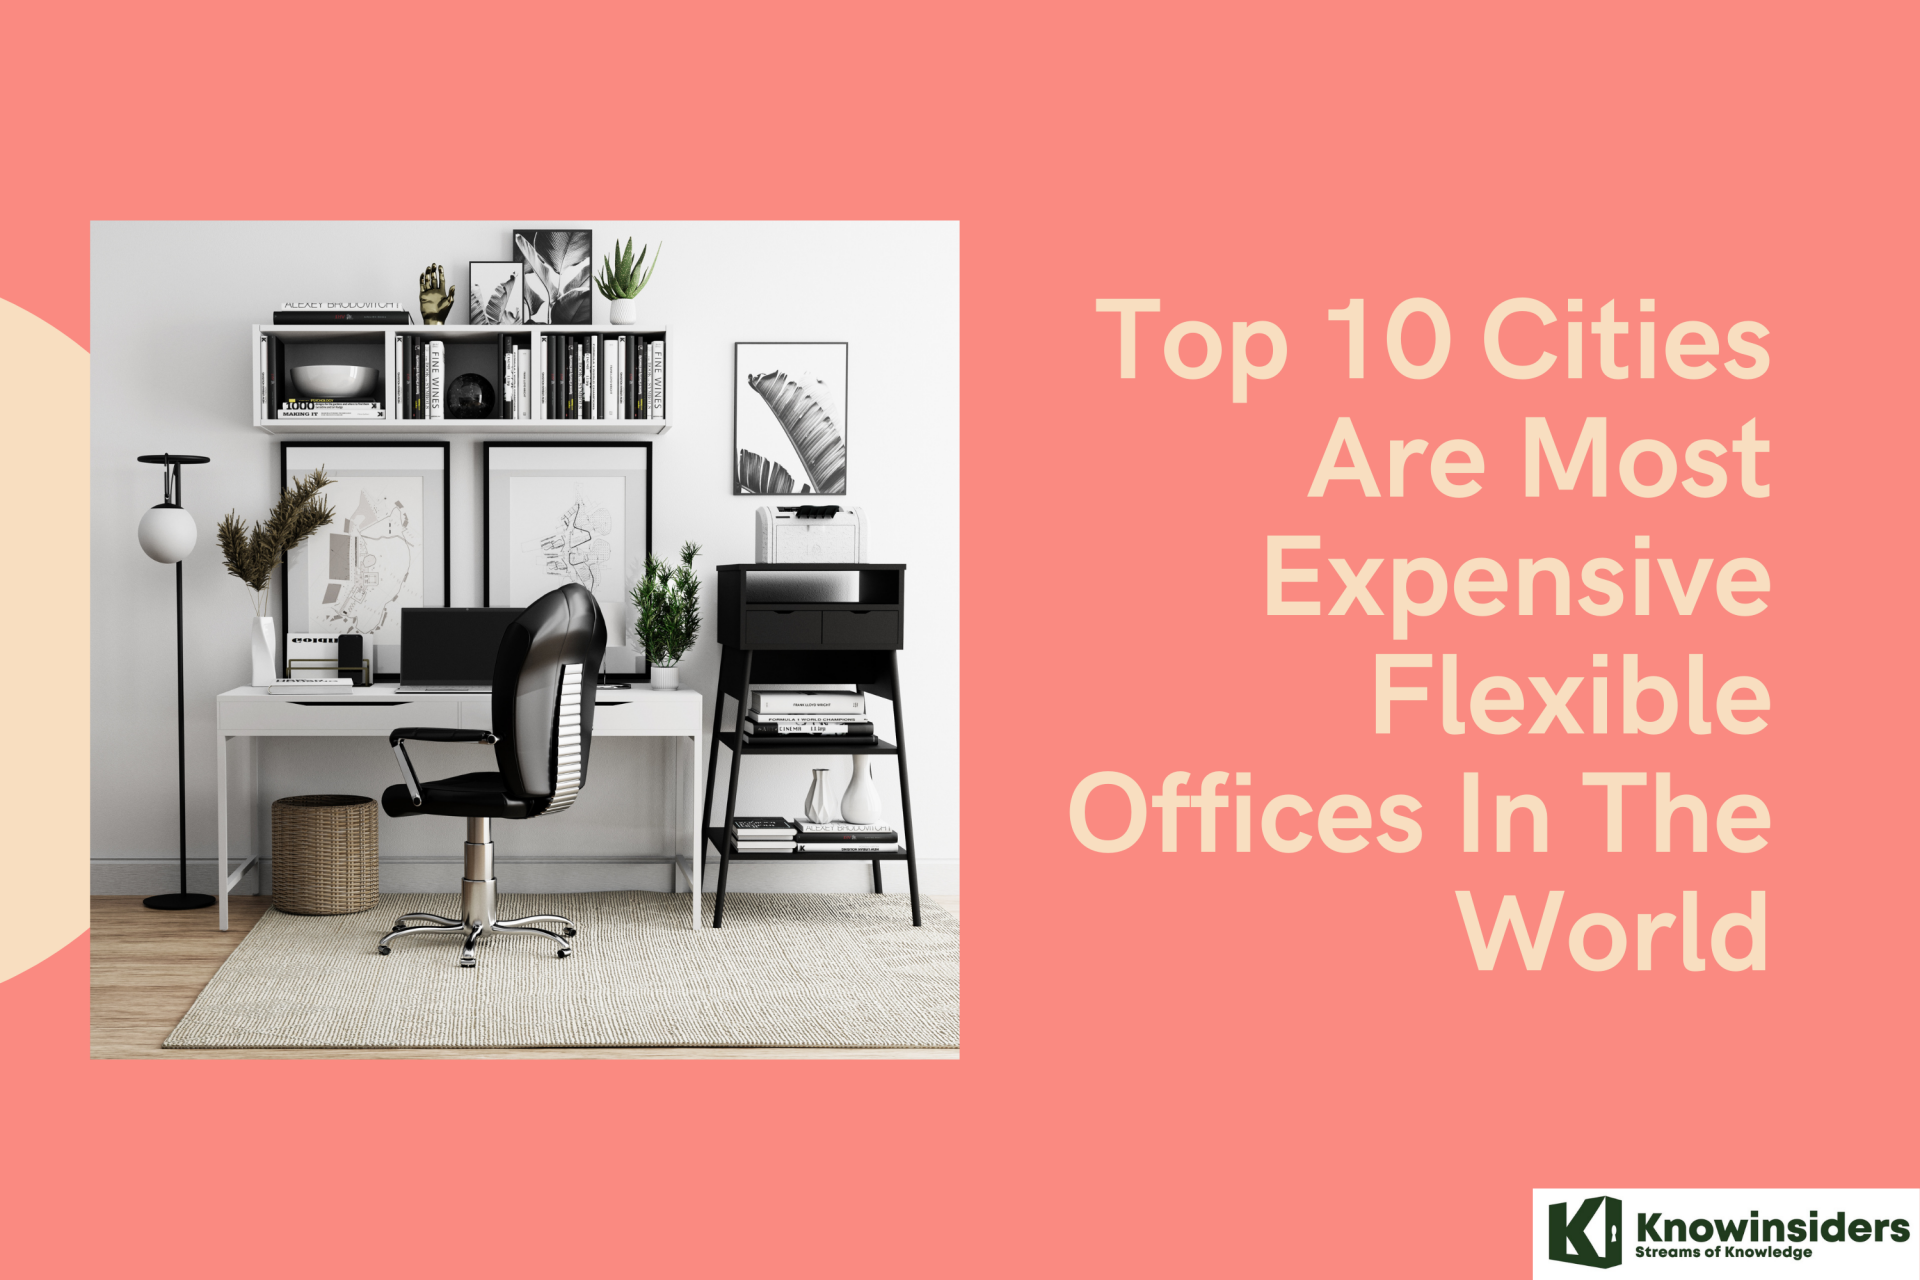 Top 10 Cities Are Most Expensive Flexible Offices In The World